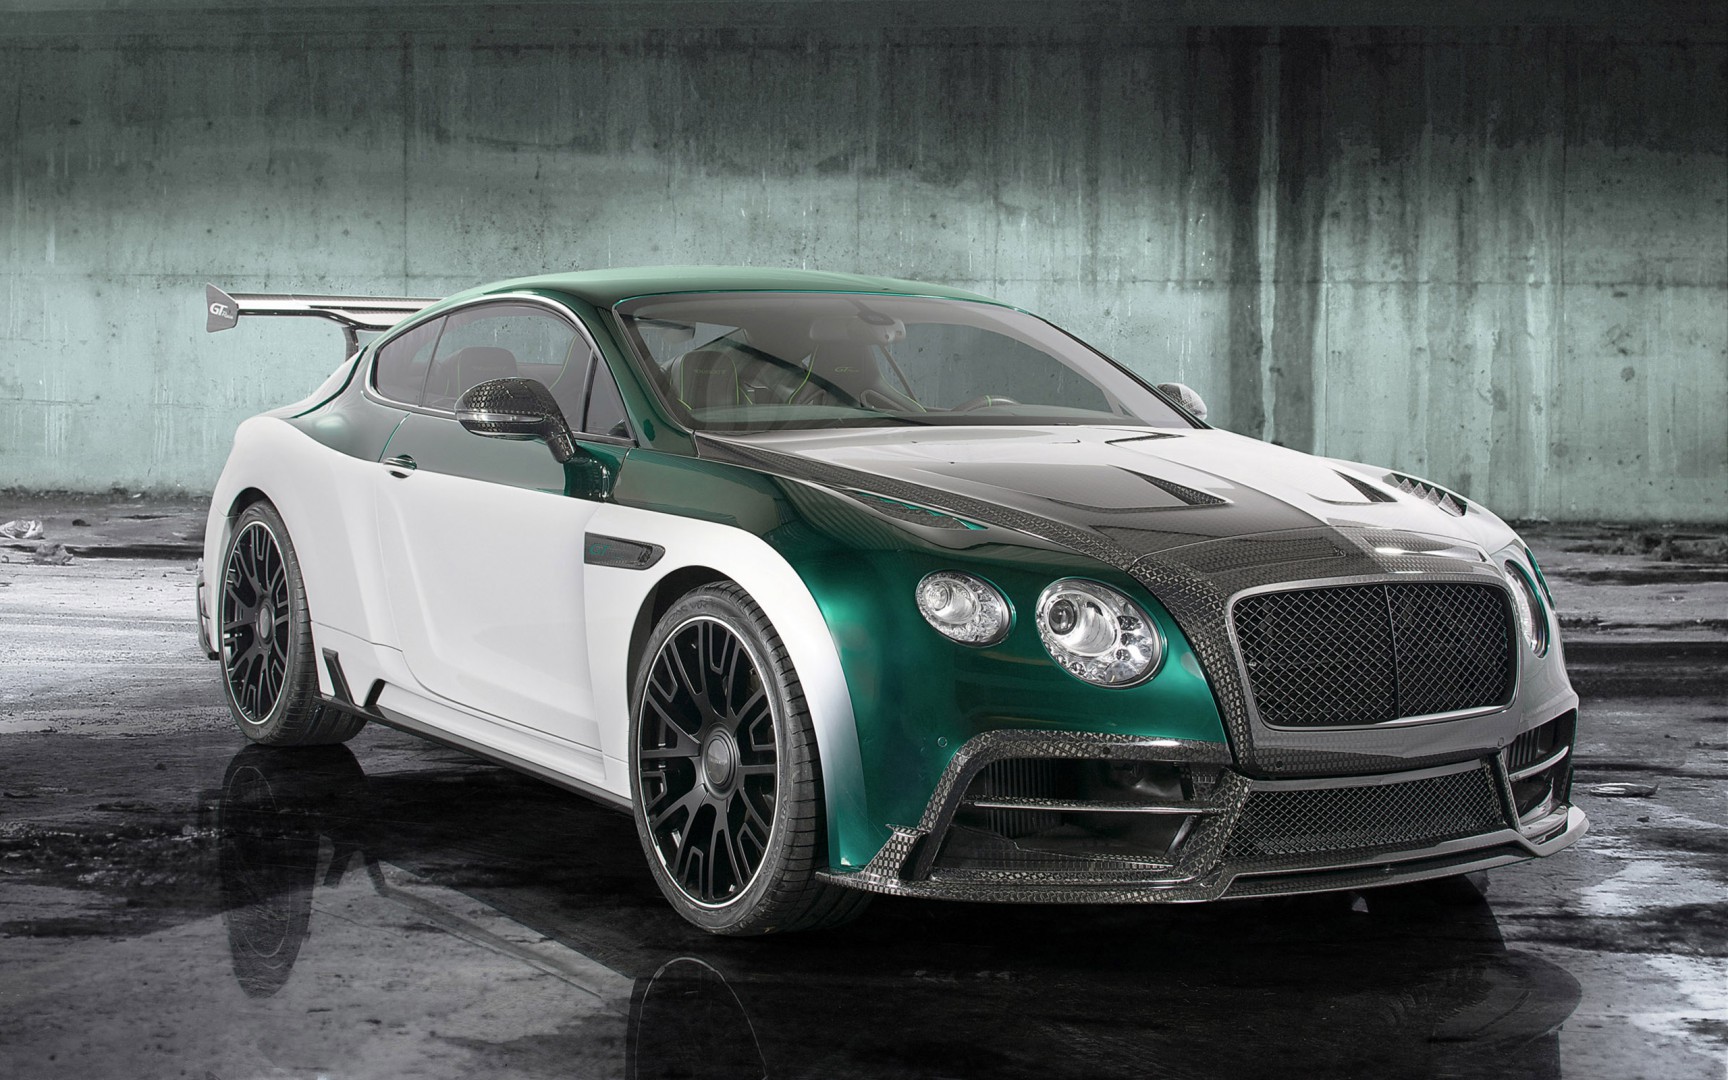 2015 Mansory Bentley Continental Gt Car Hd Wallpaper - 2015 Bentley Continental Gt Race Mansory , HD Wallpaper & Backgrounds